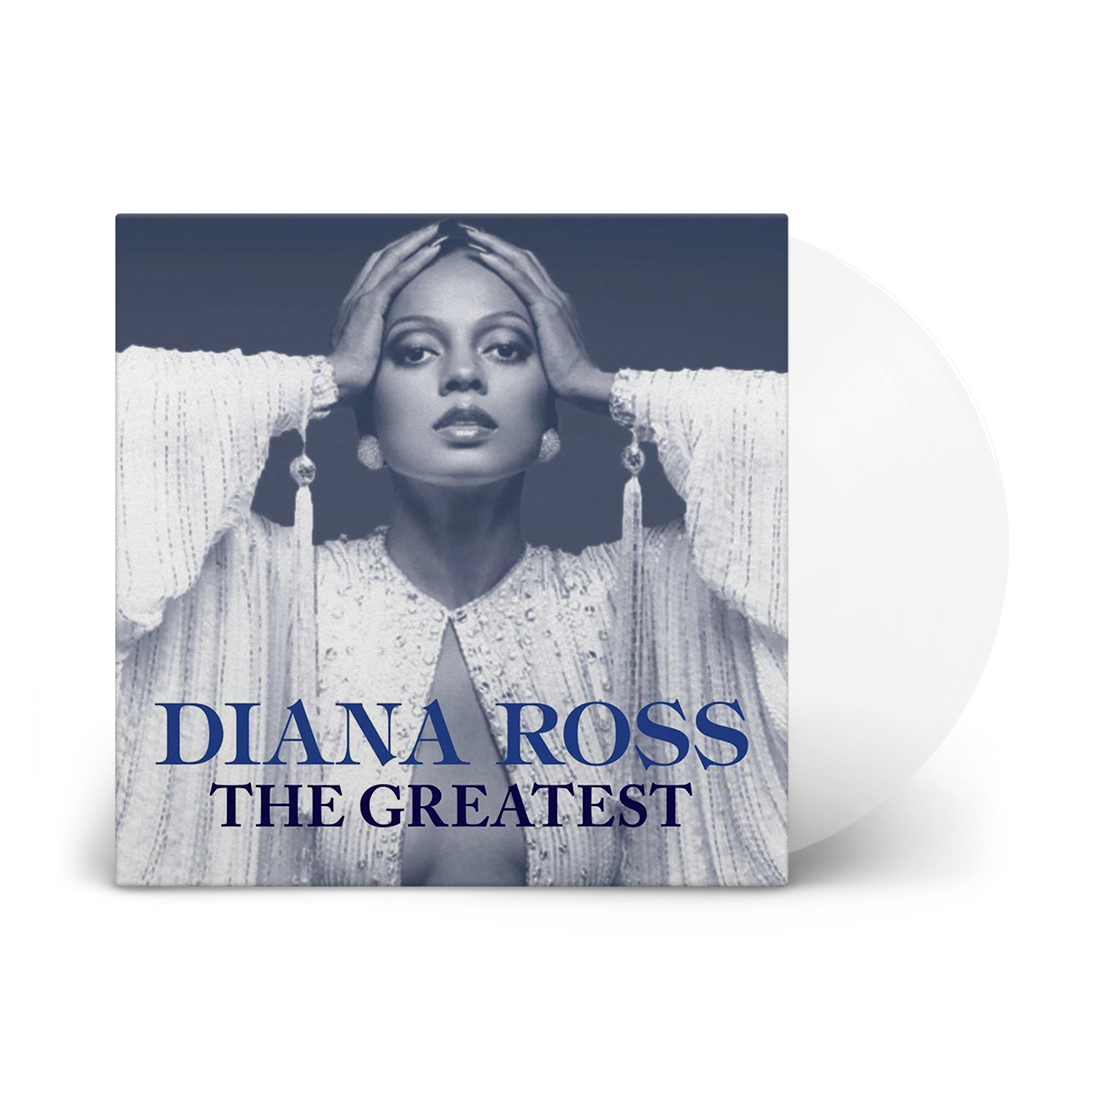 Diana Ross - The Greatest: Limited Clear Vinyl 2LP 